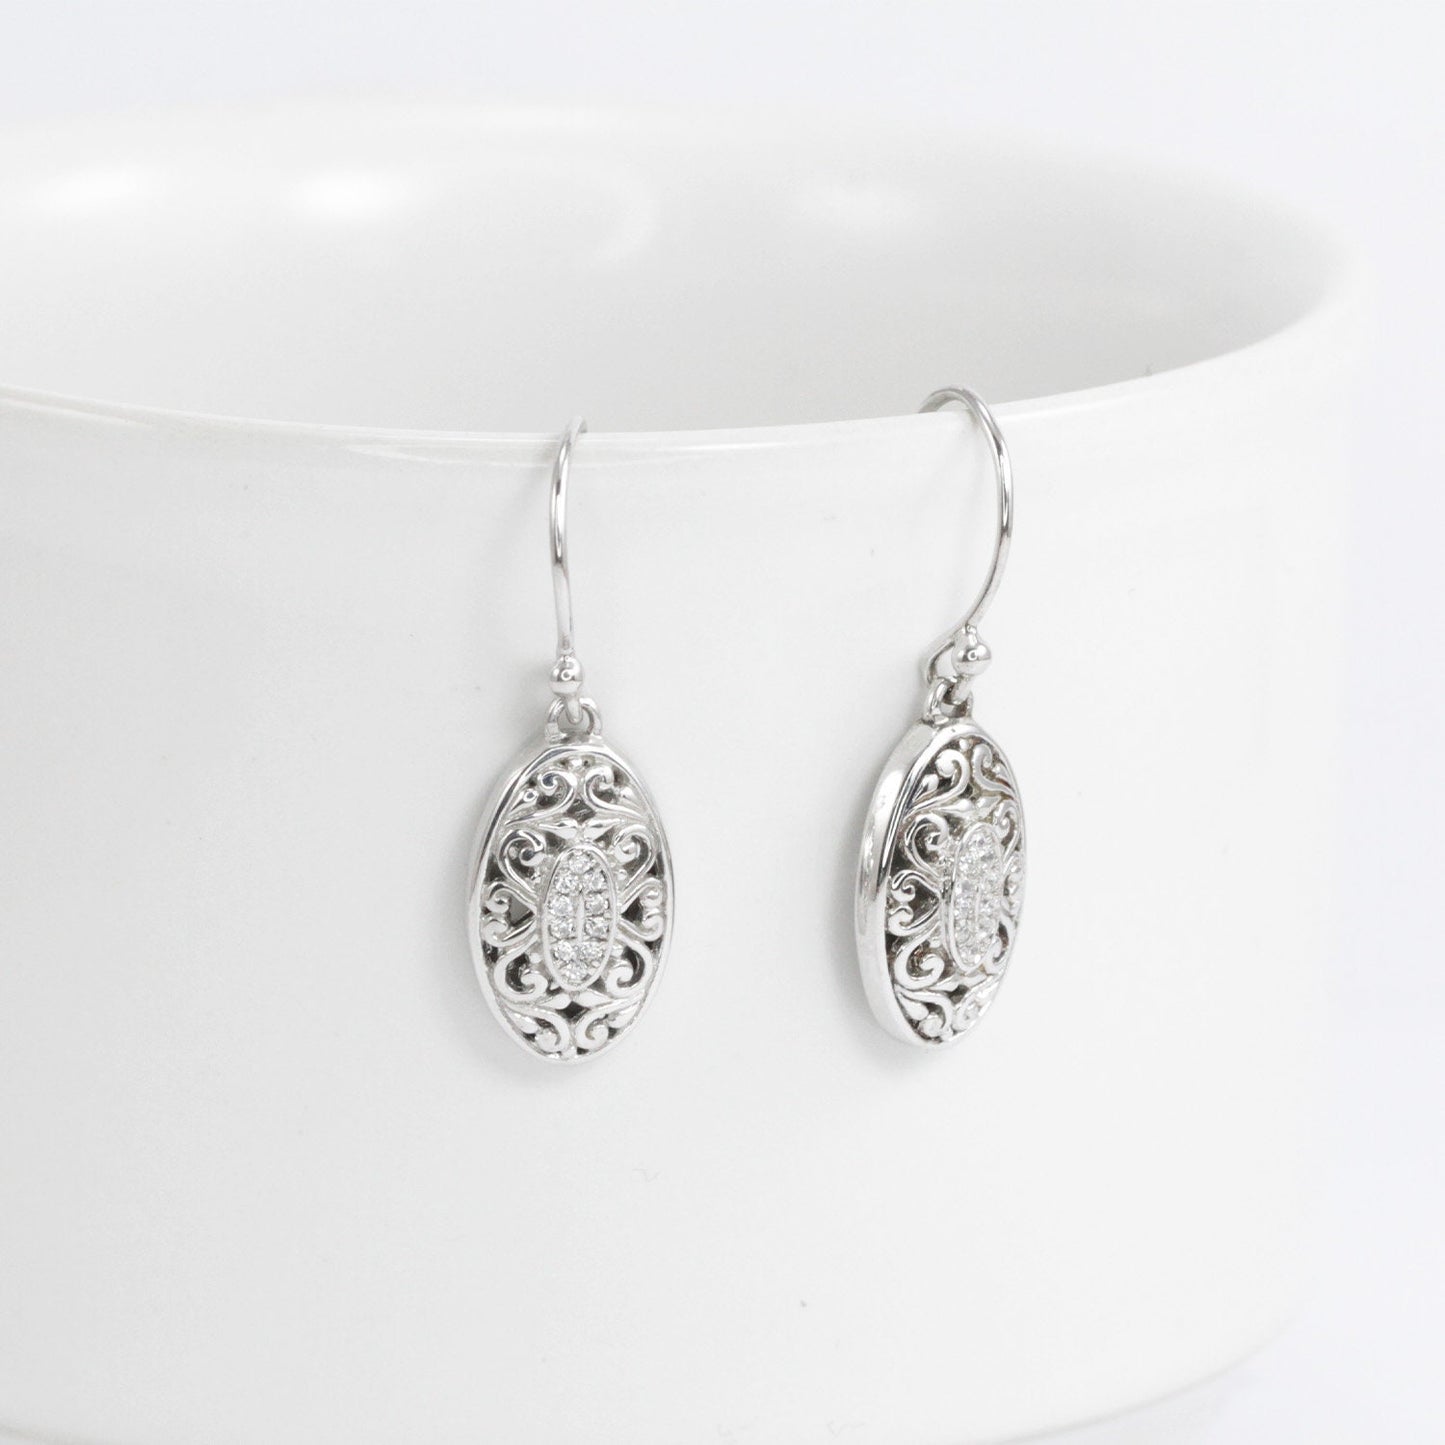 925 sterling silver earrings oval shape decorated with open work filigree and white zirconia